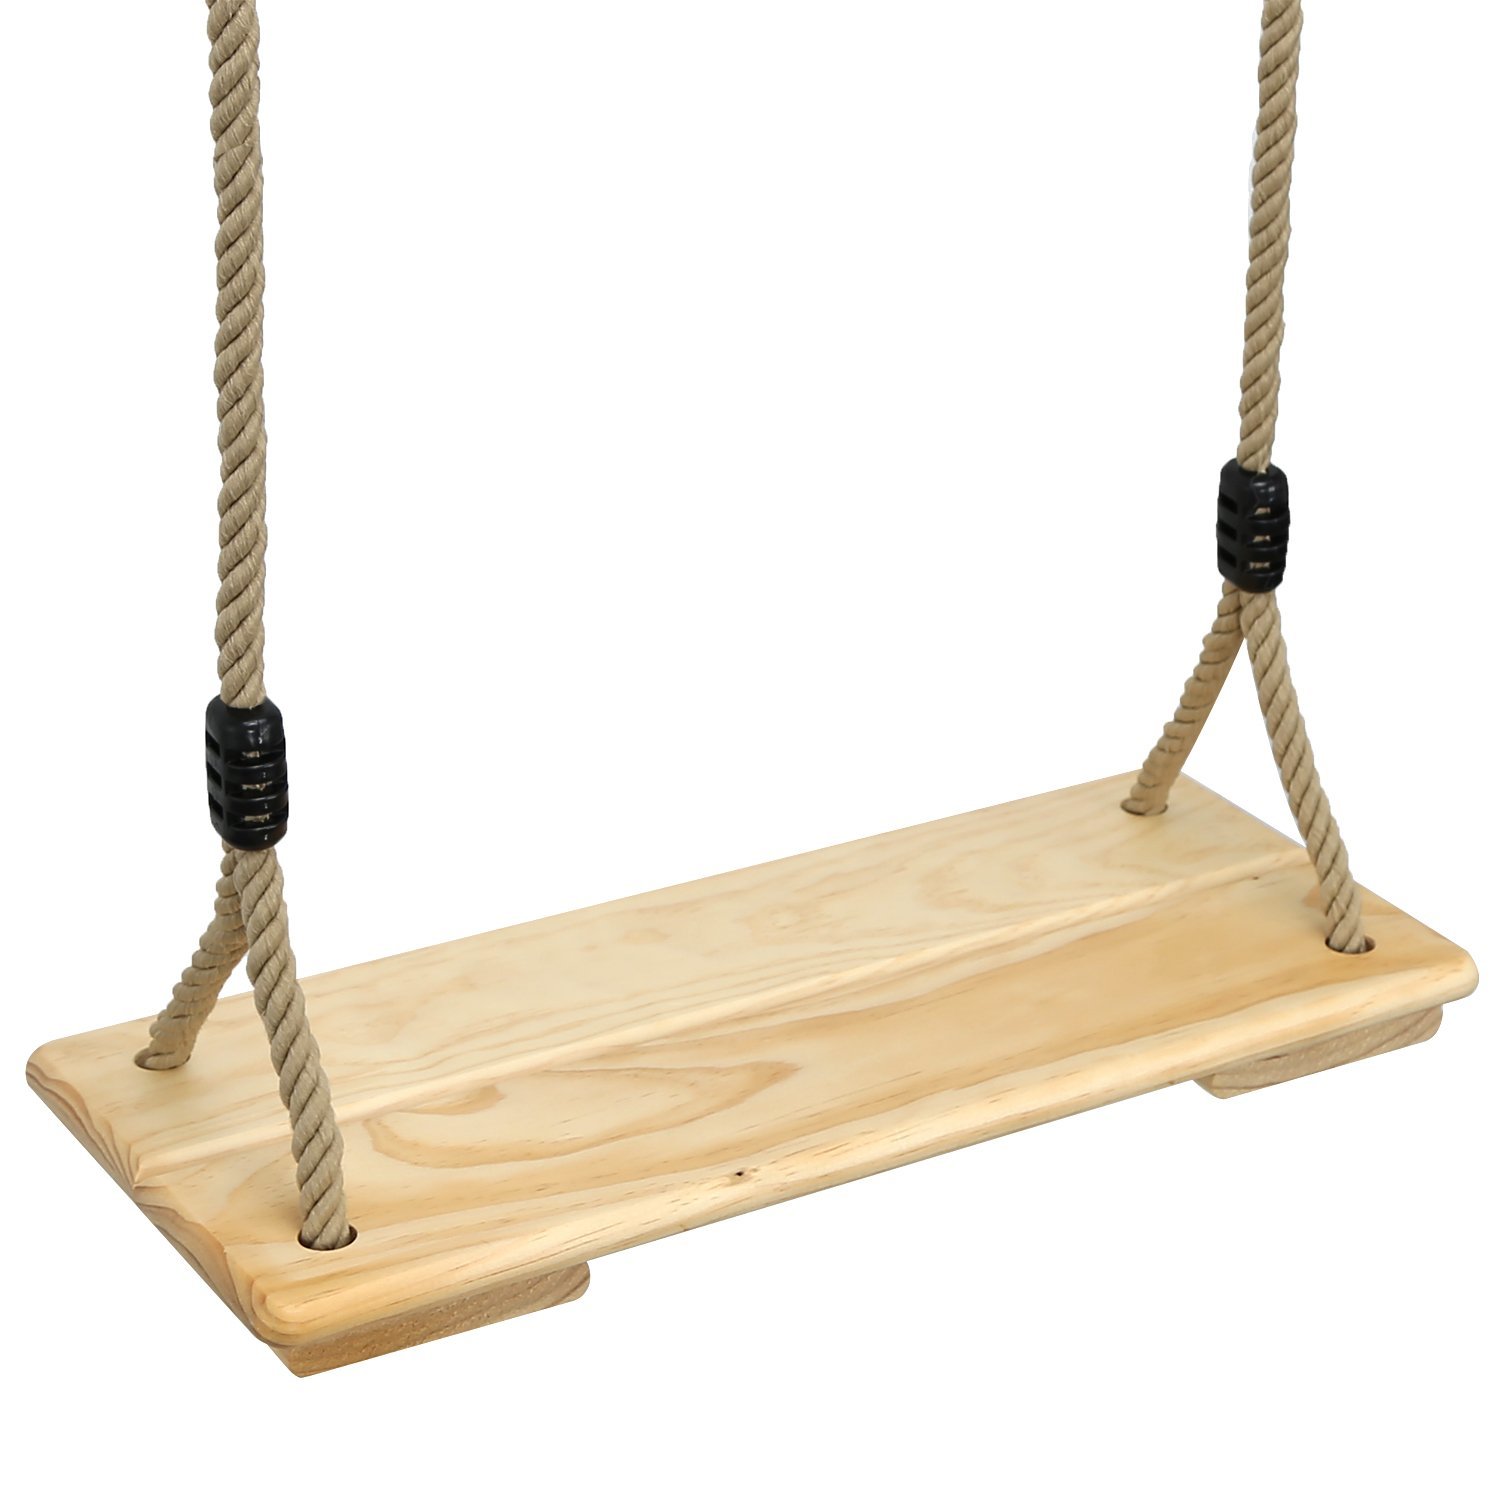 PELLOR Wooden Swing Seat Indoor and Outdoor Hanging Seat Max Load 100KG (Rope Max: 210cm, burlywood)